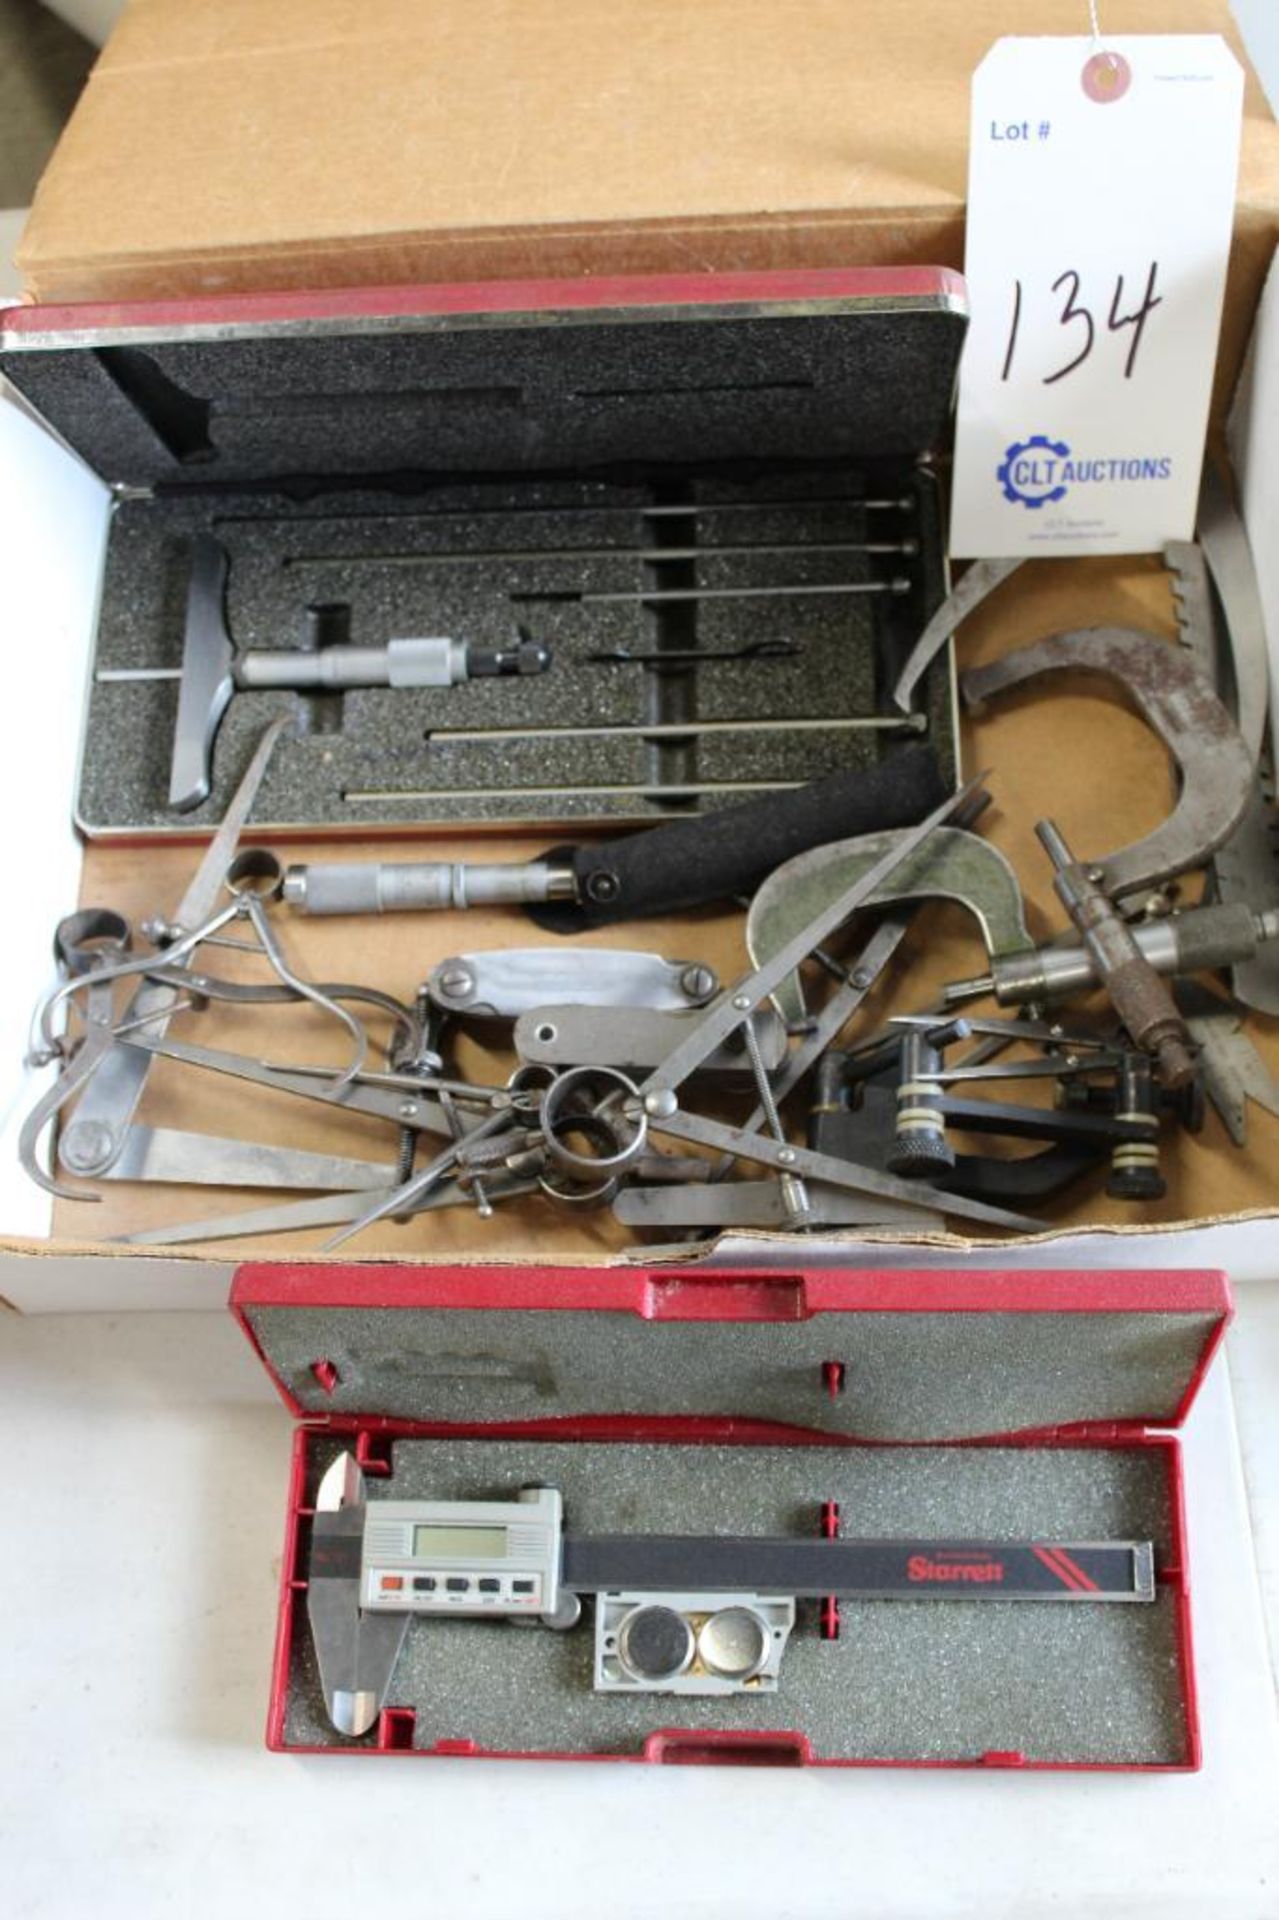 Machinist inspection tools